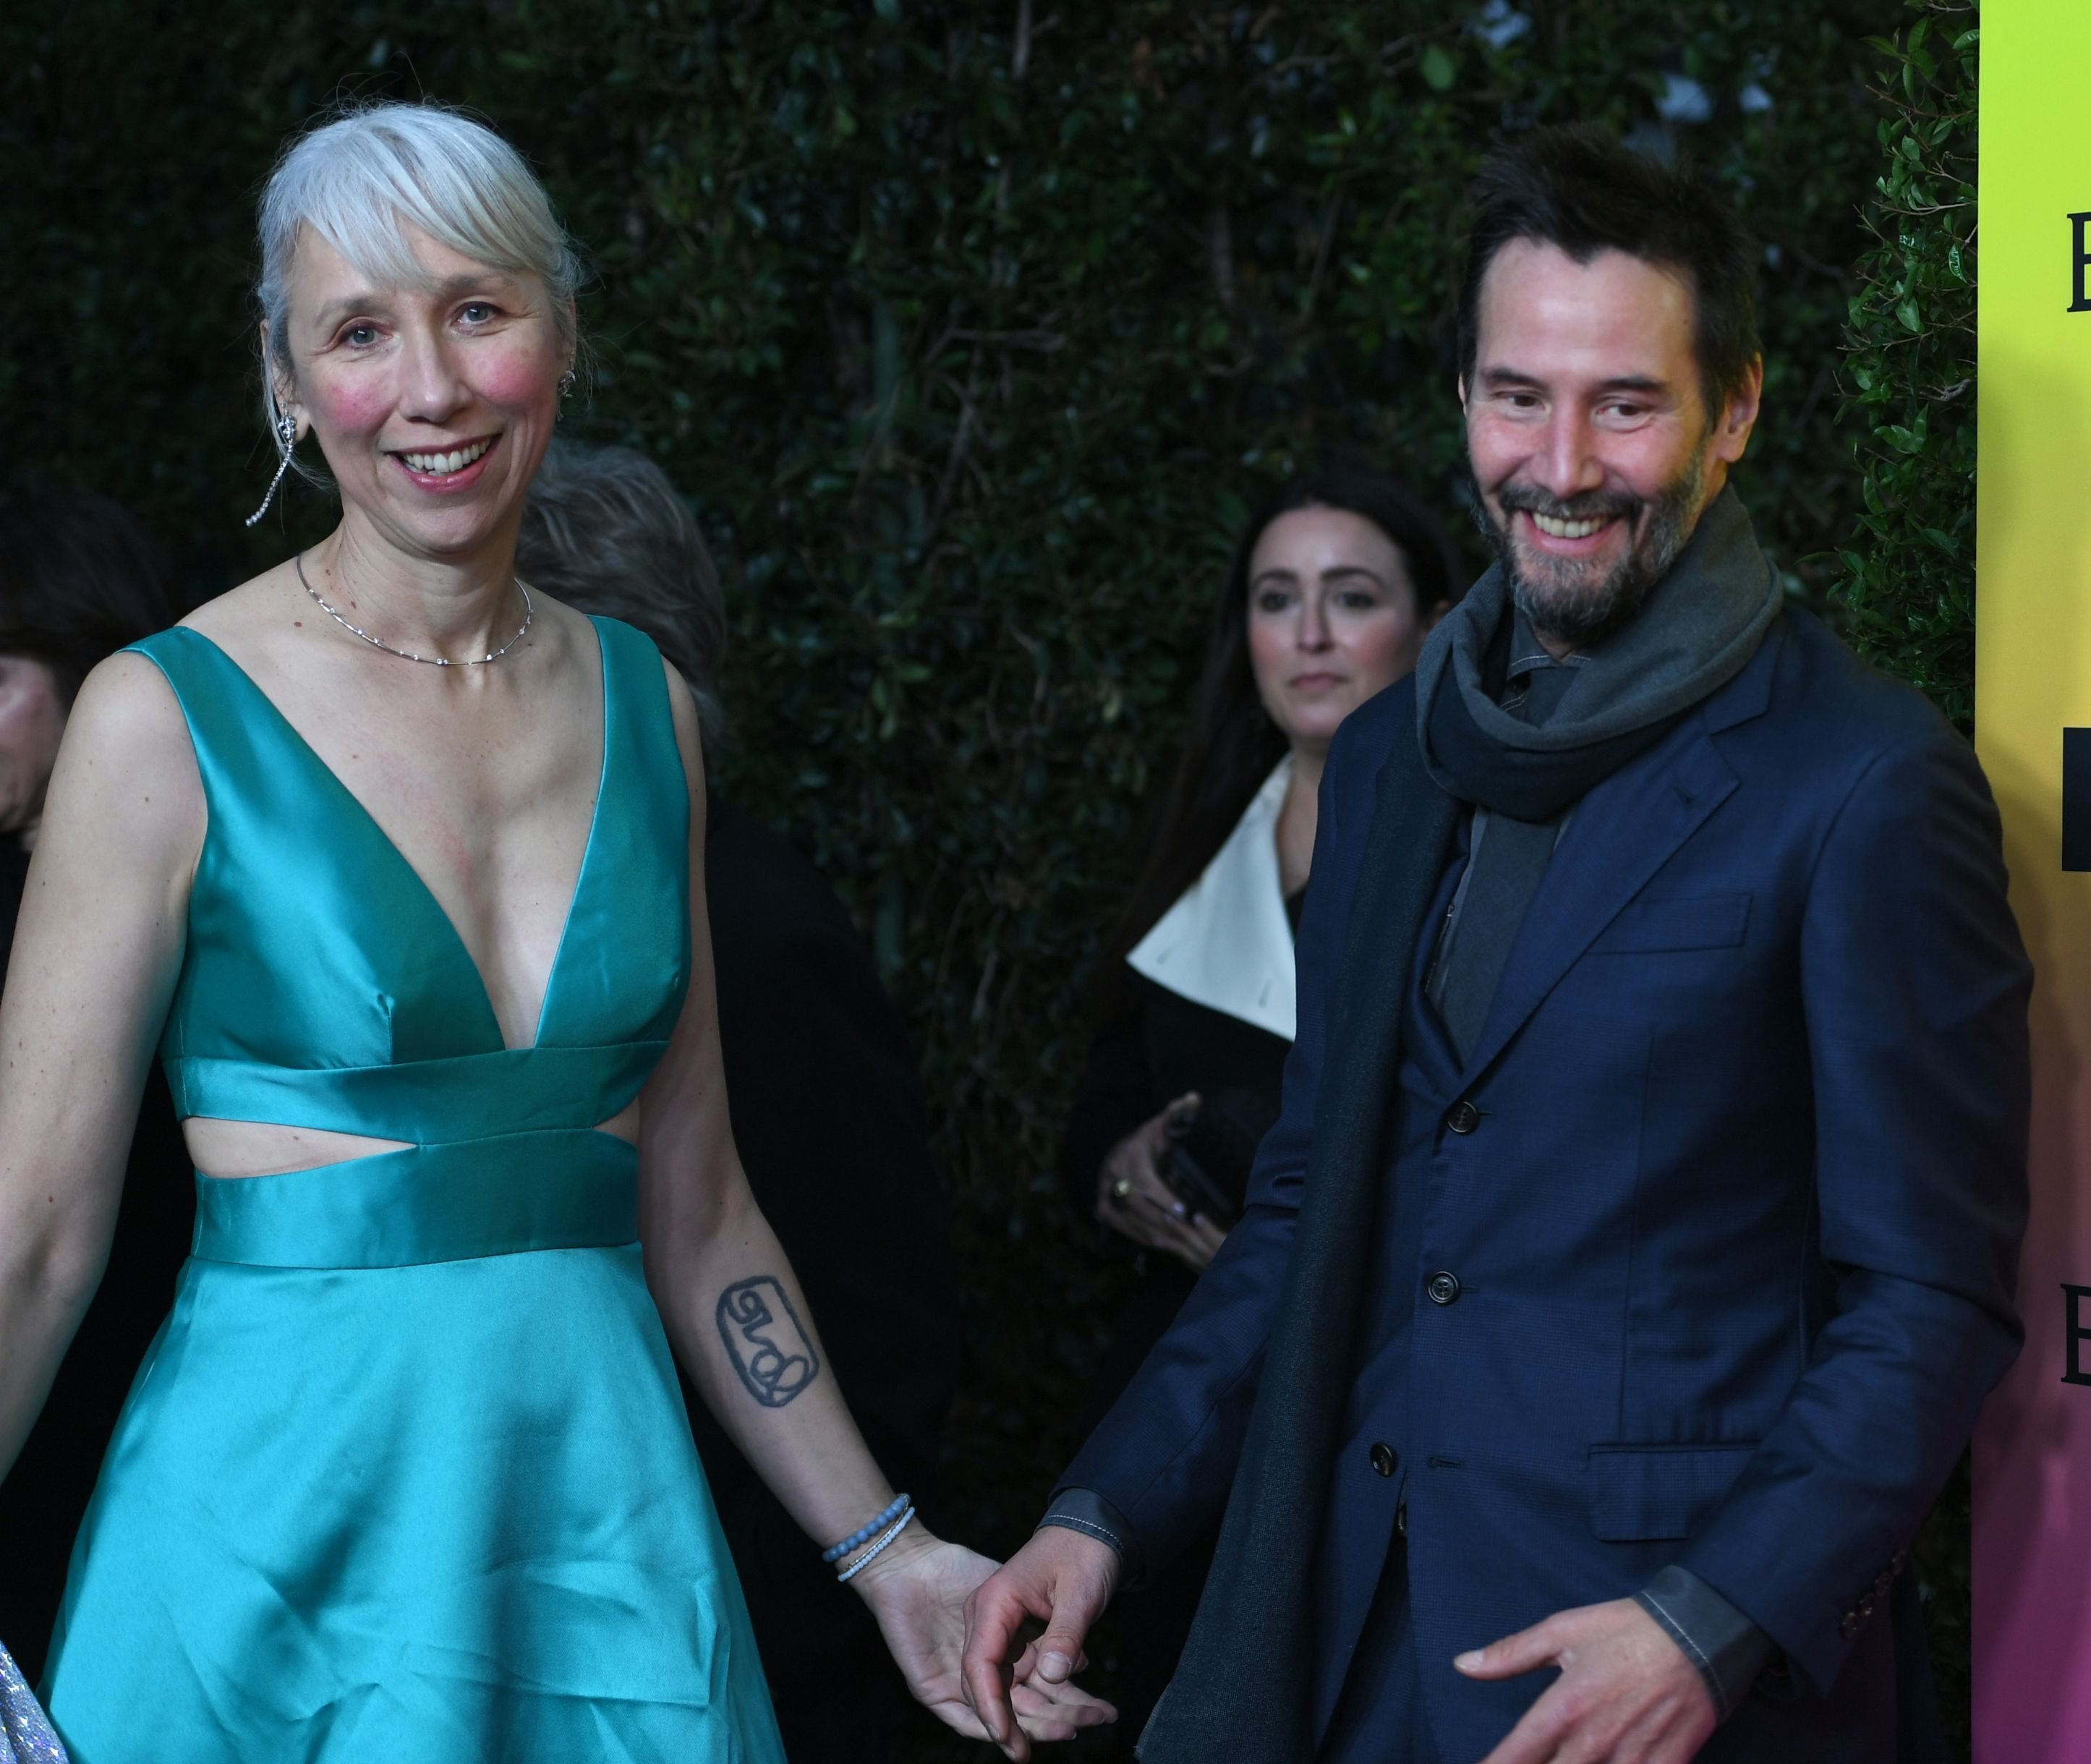 Alexandra and Keanu have been an item since 2019